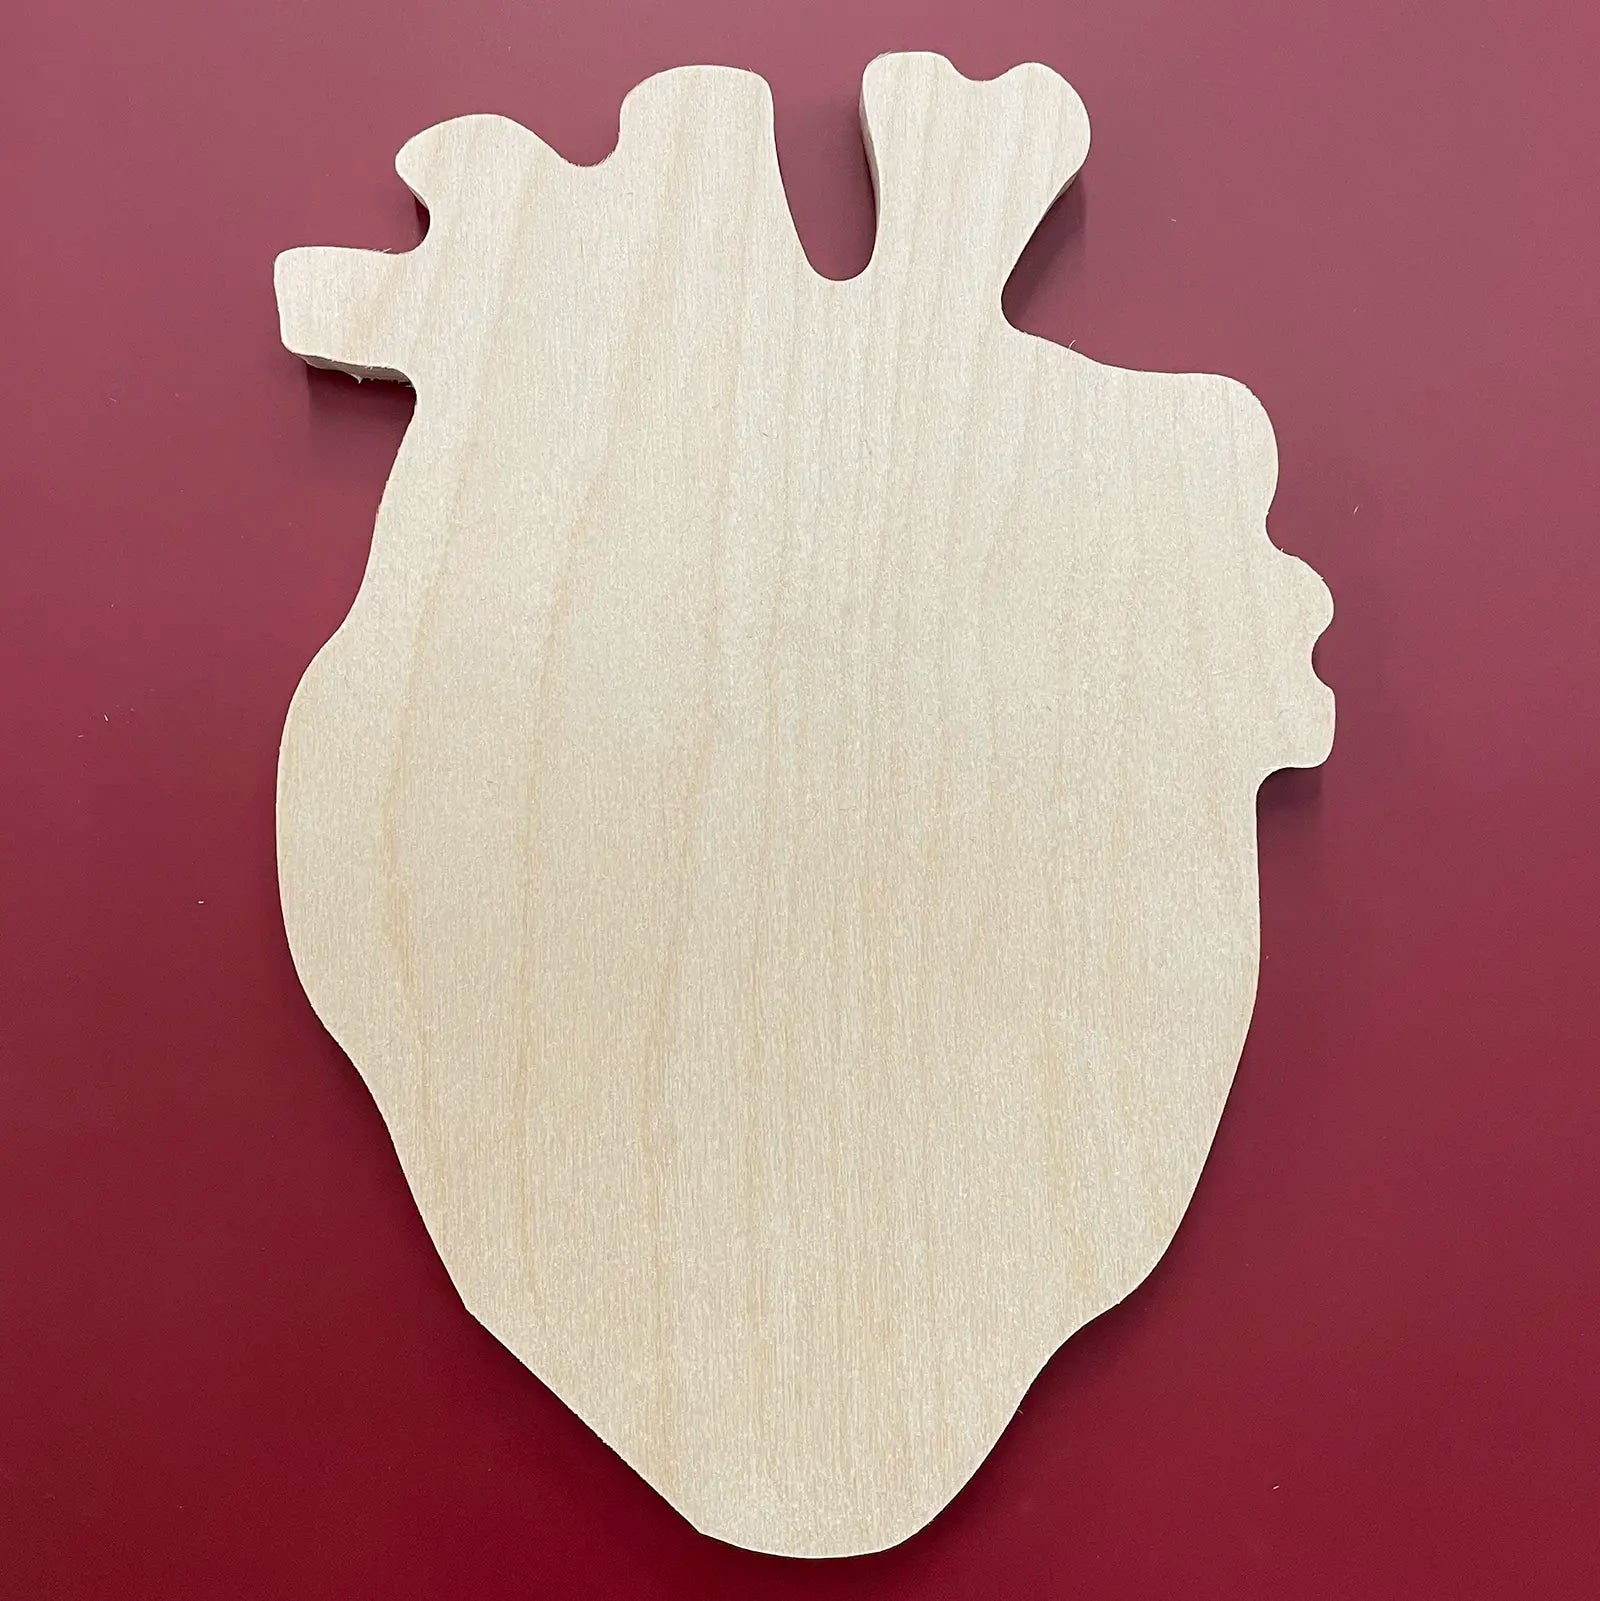 Anatomical Heart Wooden Painting Canvas